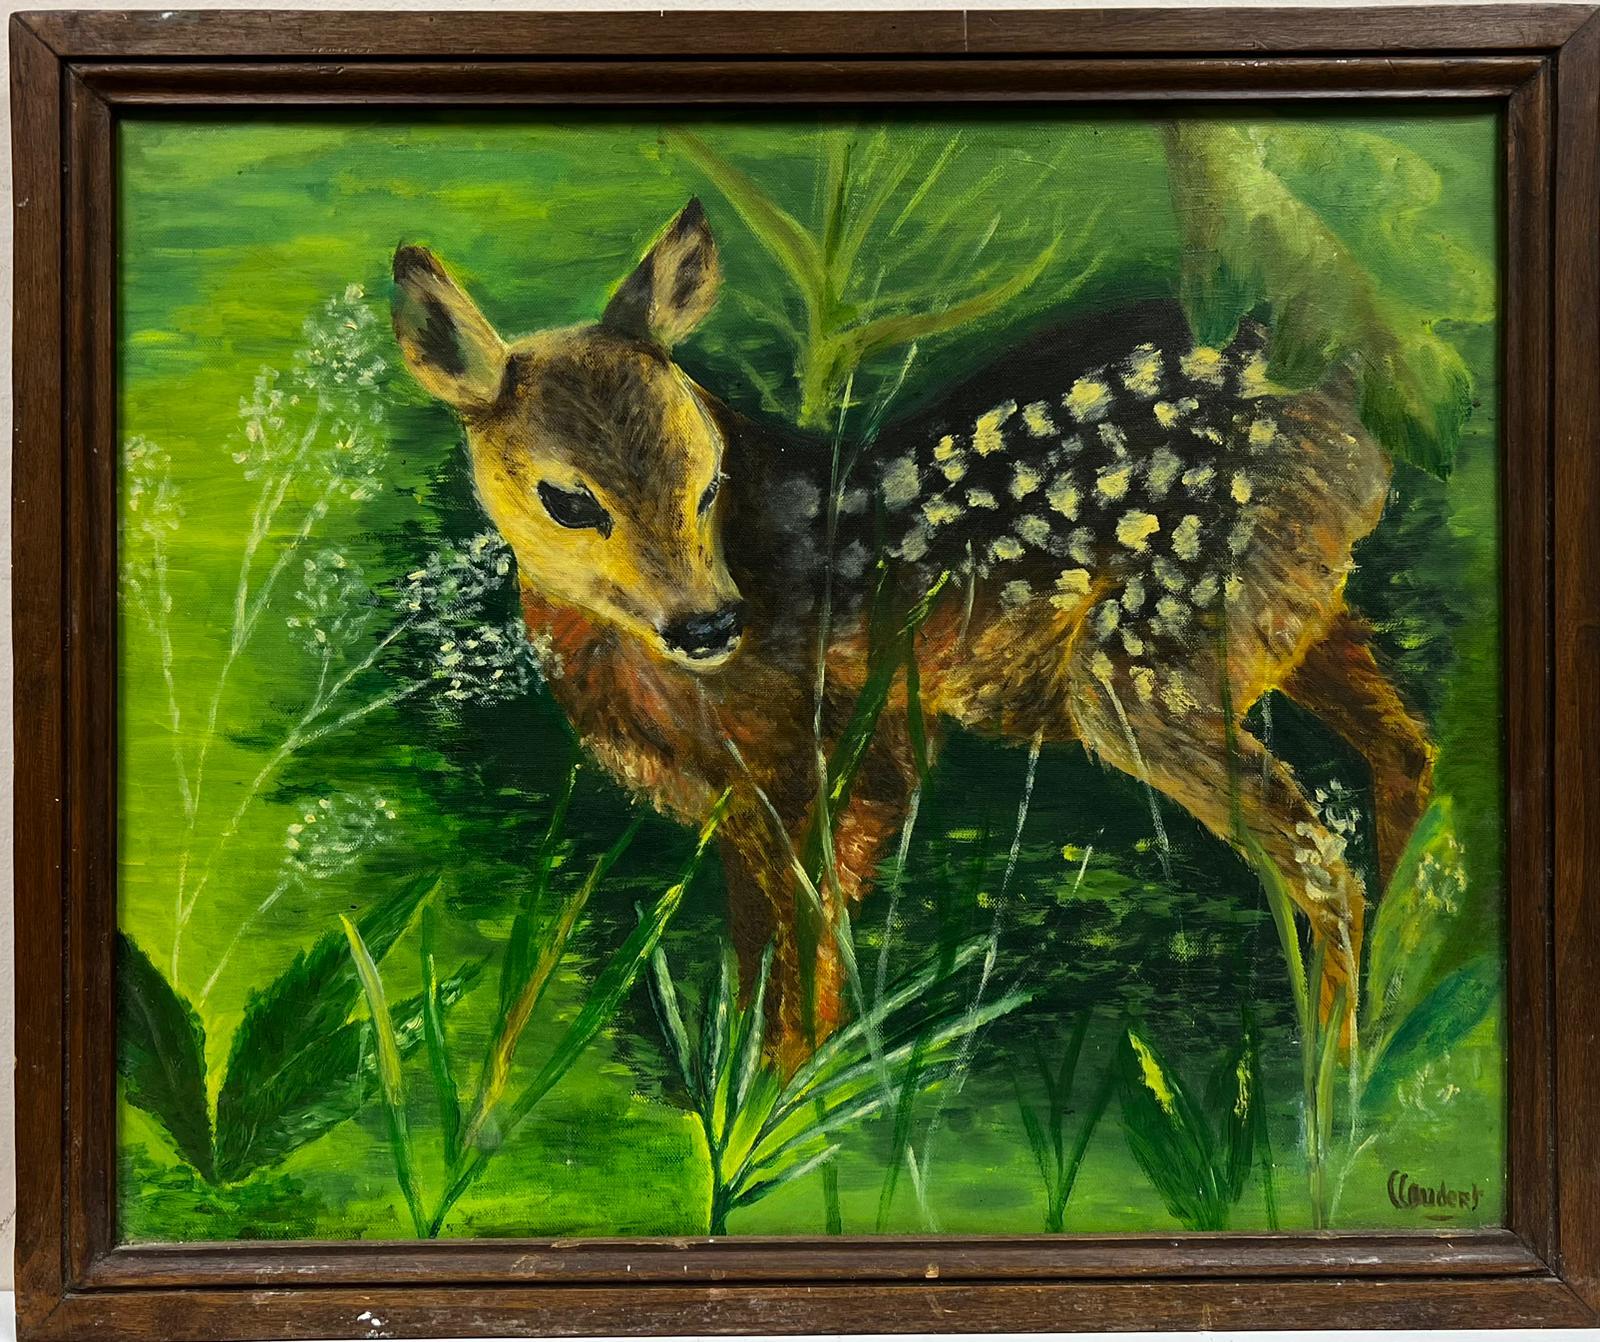 Signed French Oil Portrait of a Fawn Baby Deer in Green Landscape - Painting by 20th Century French School